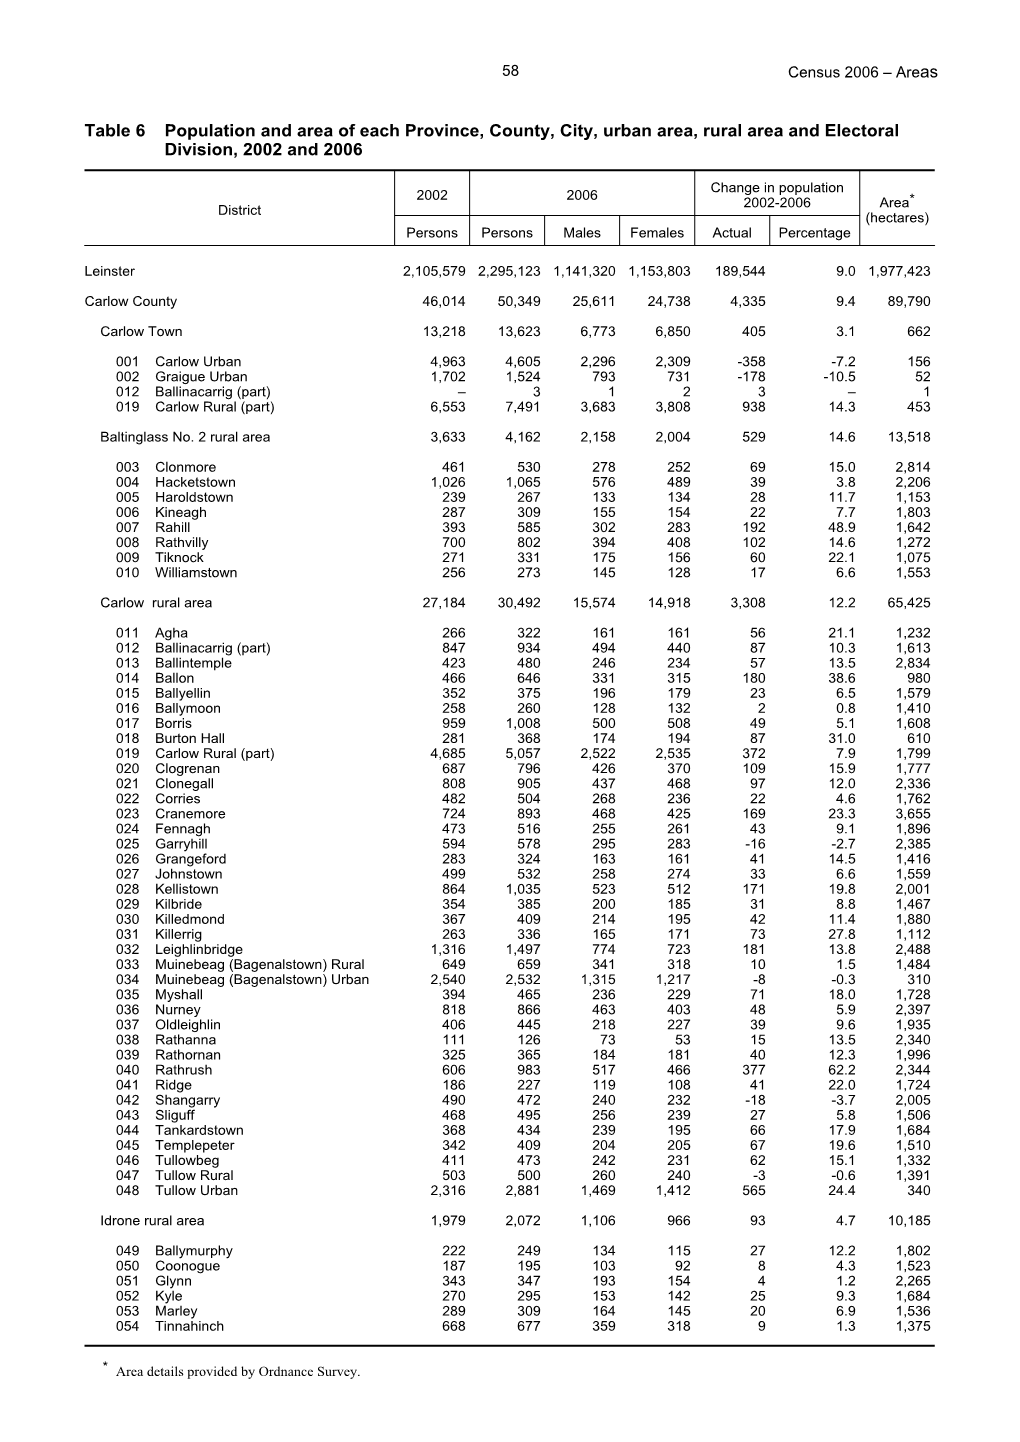 Table 6 Population and Area of Each Province, County, City, Urban Area, Rural Area and Electoral Division, 2002 and 2006